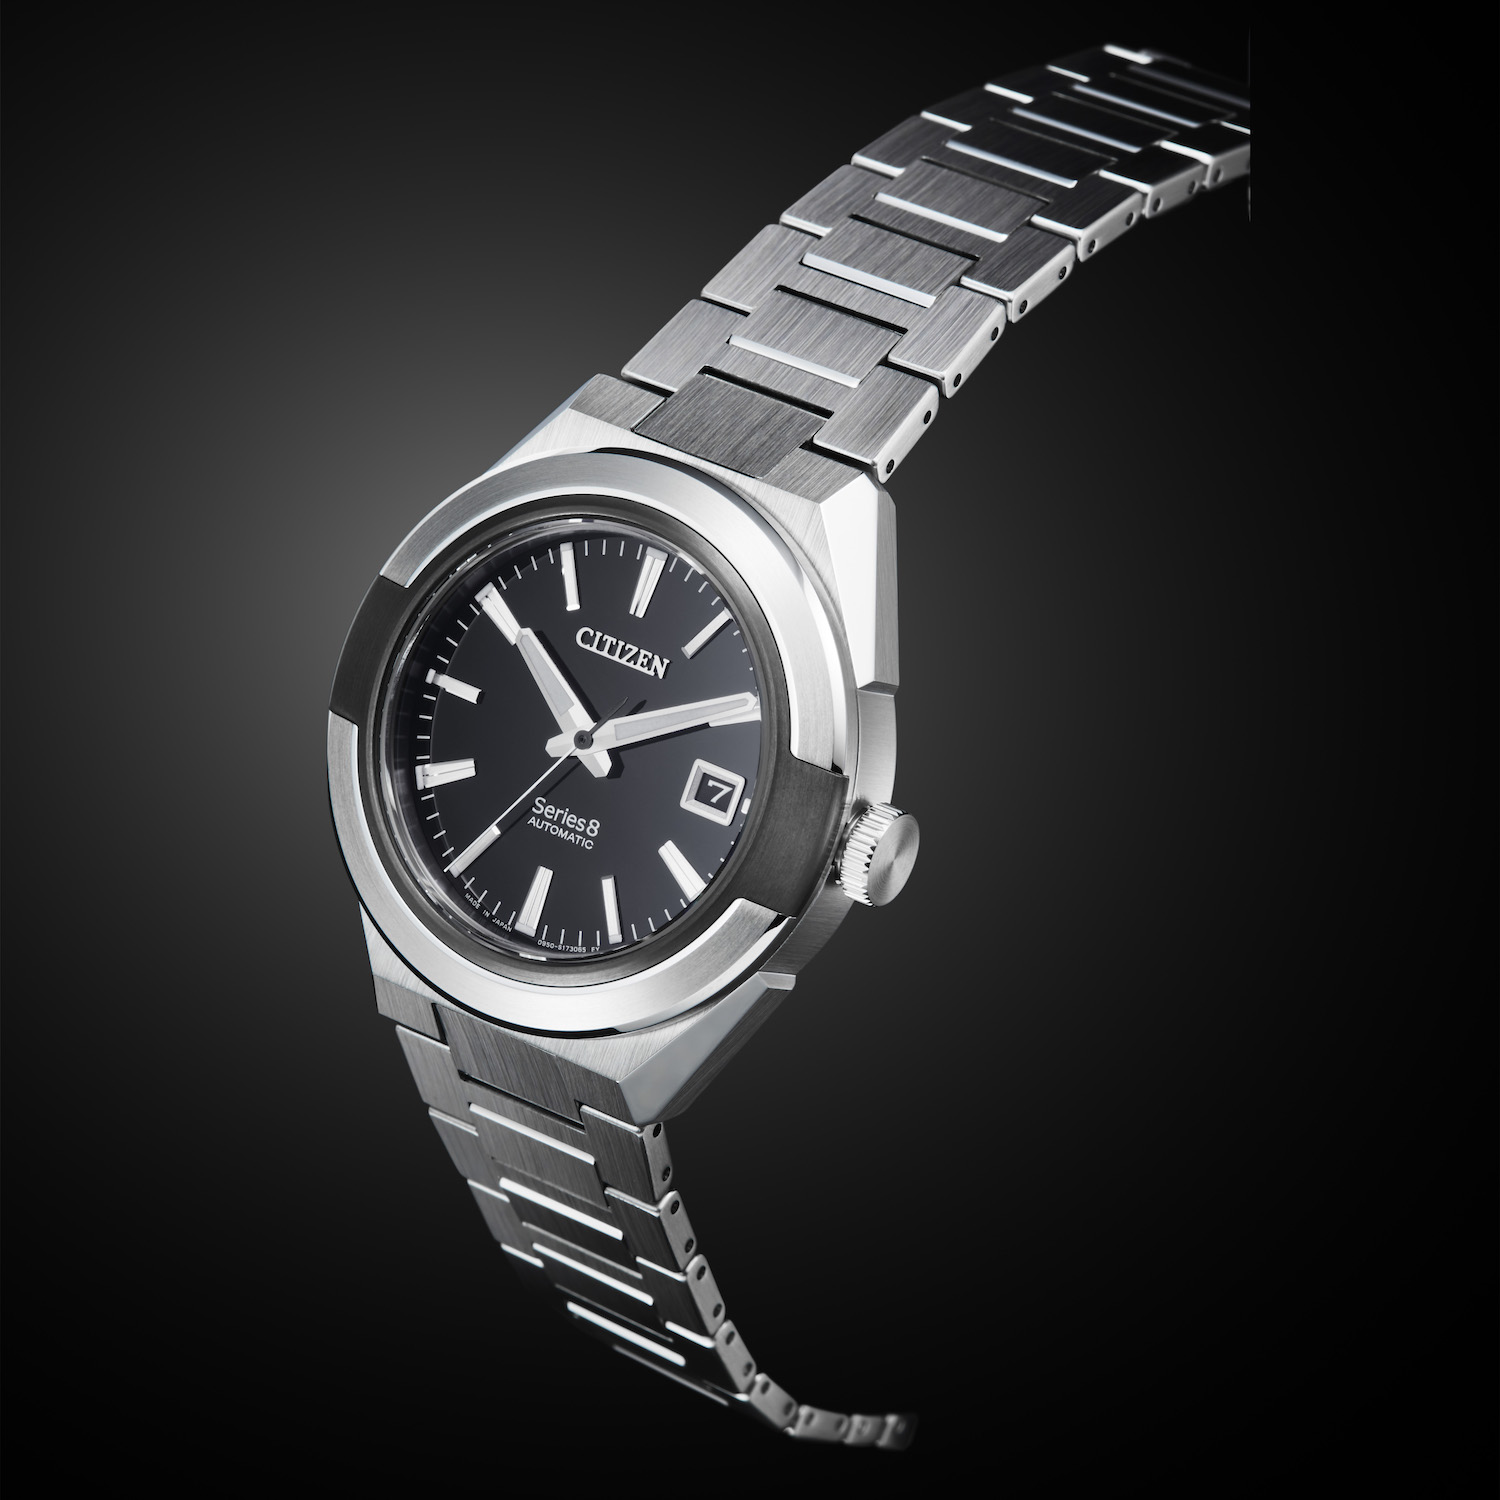 Citizen Expands Mechanical Series 8 to U.S.